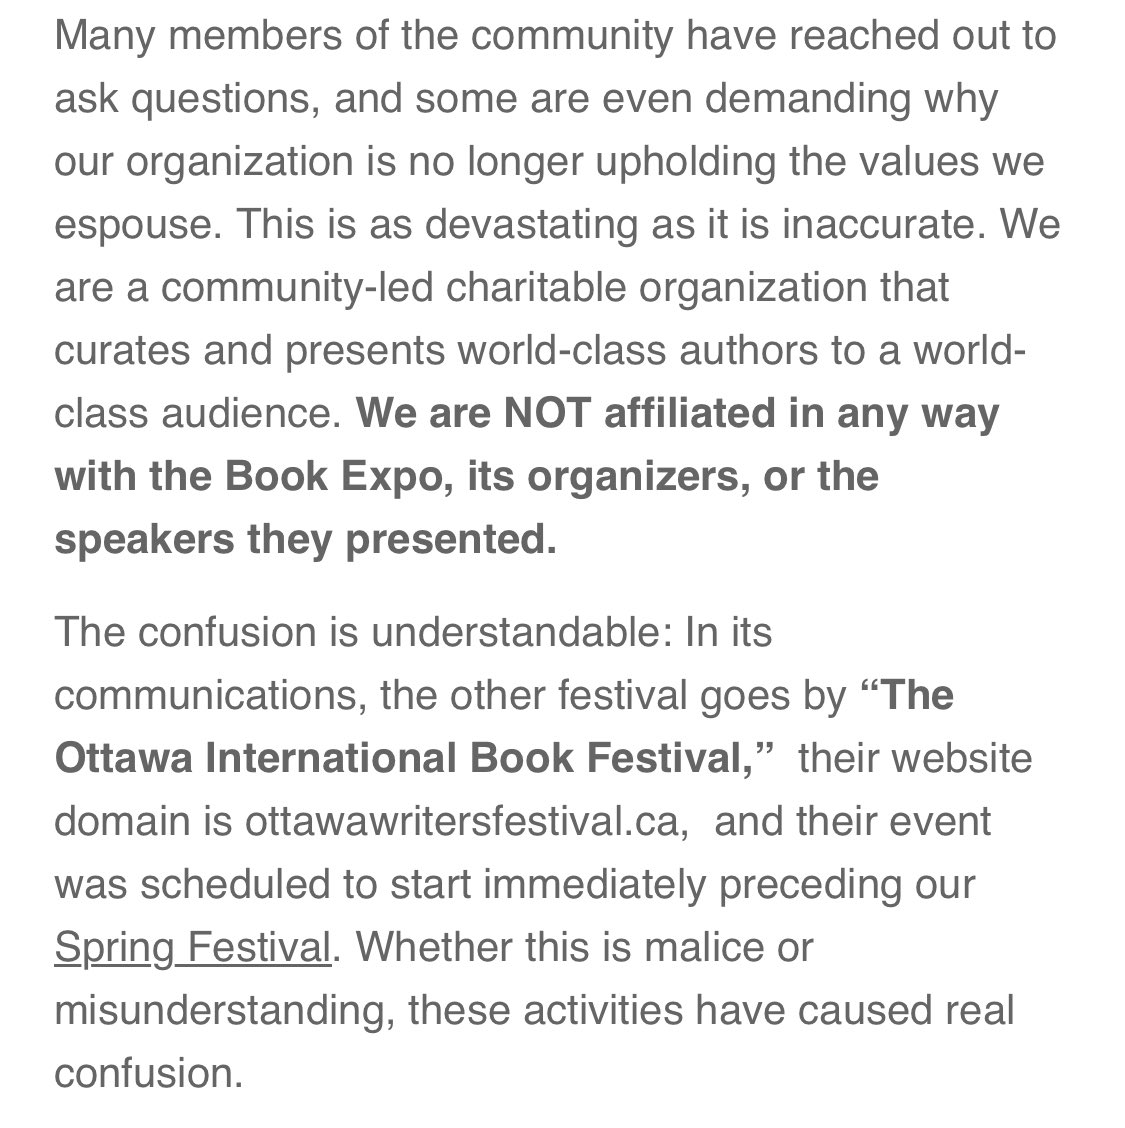 The Ottawa International Writers Festival (@Writersfest) has issued a statement clarifying they are not the same org as the Ottawa International Food and Book Expo. They’ve gotten angry feedback, in part because the Ottawa Book Expo bought the URL: ottawawritersfestival dot ca.